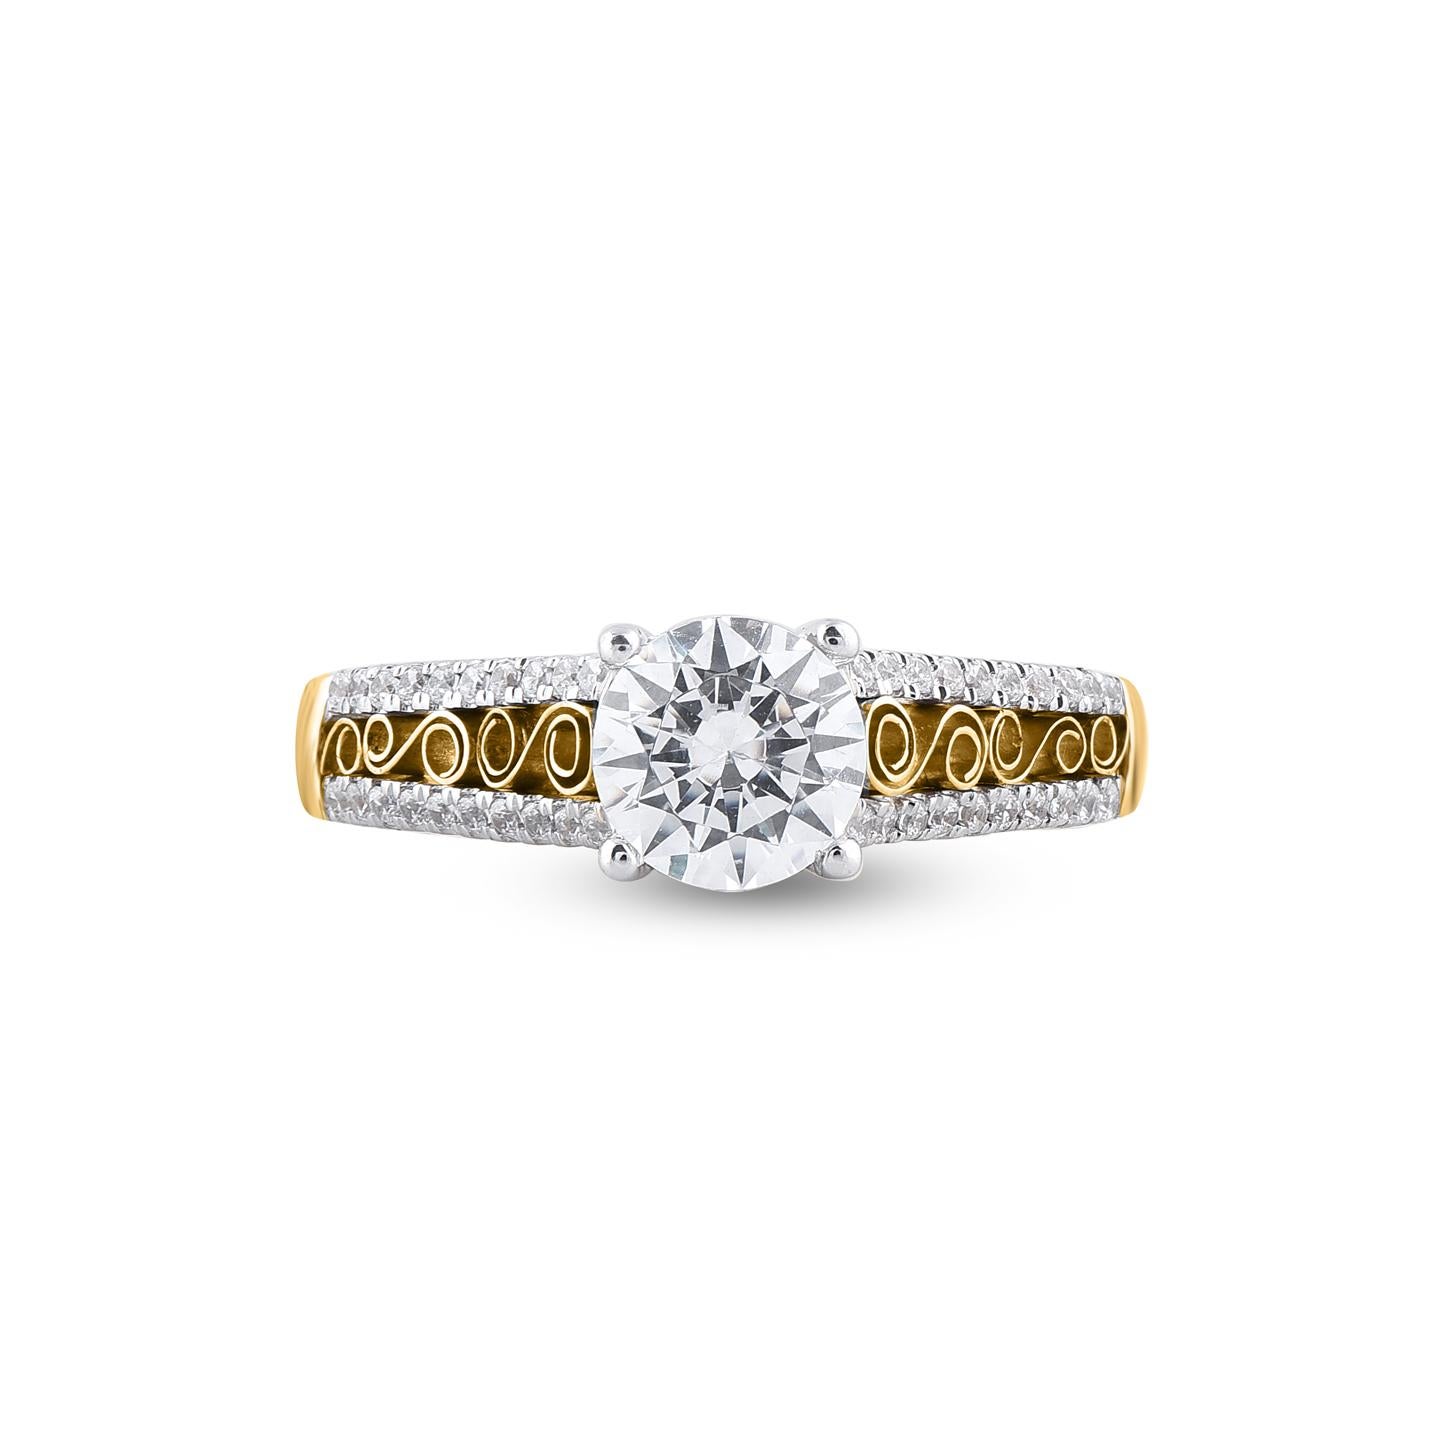 Express your love for her in the most classic way with this wedding ring. Beautifully crafted by our inhouse experts in 14 karat yellow gold and embellished with 41 brilliant cut and single cut round diamond set in prong setting. Total diamond